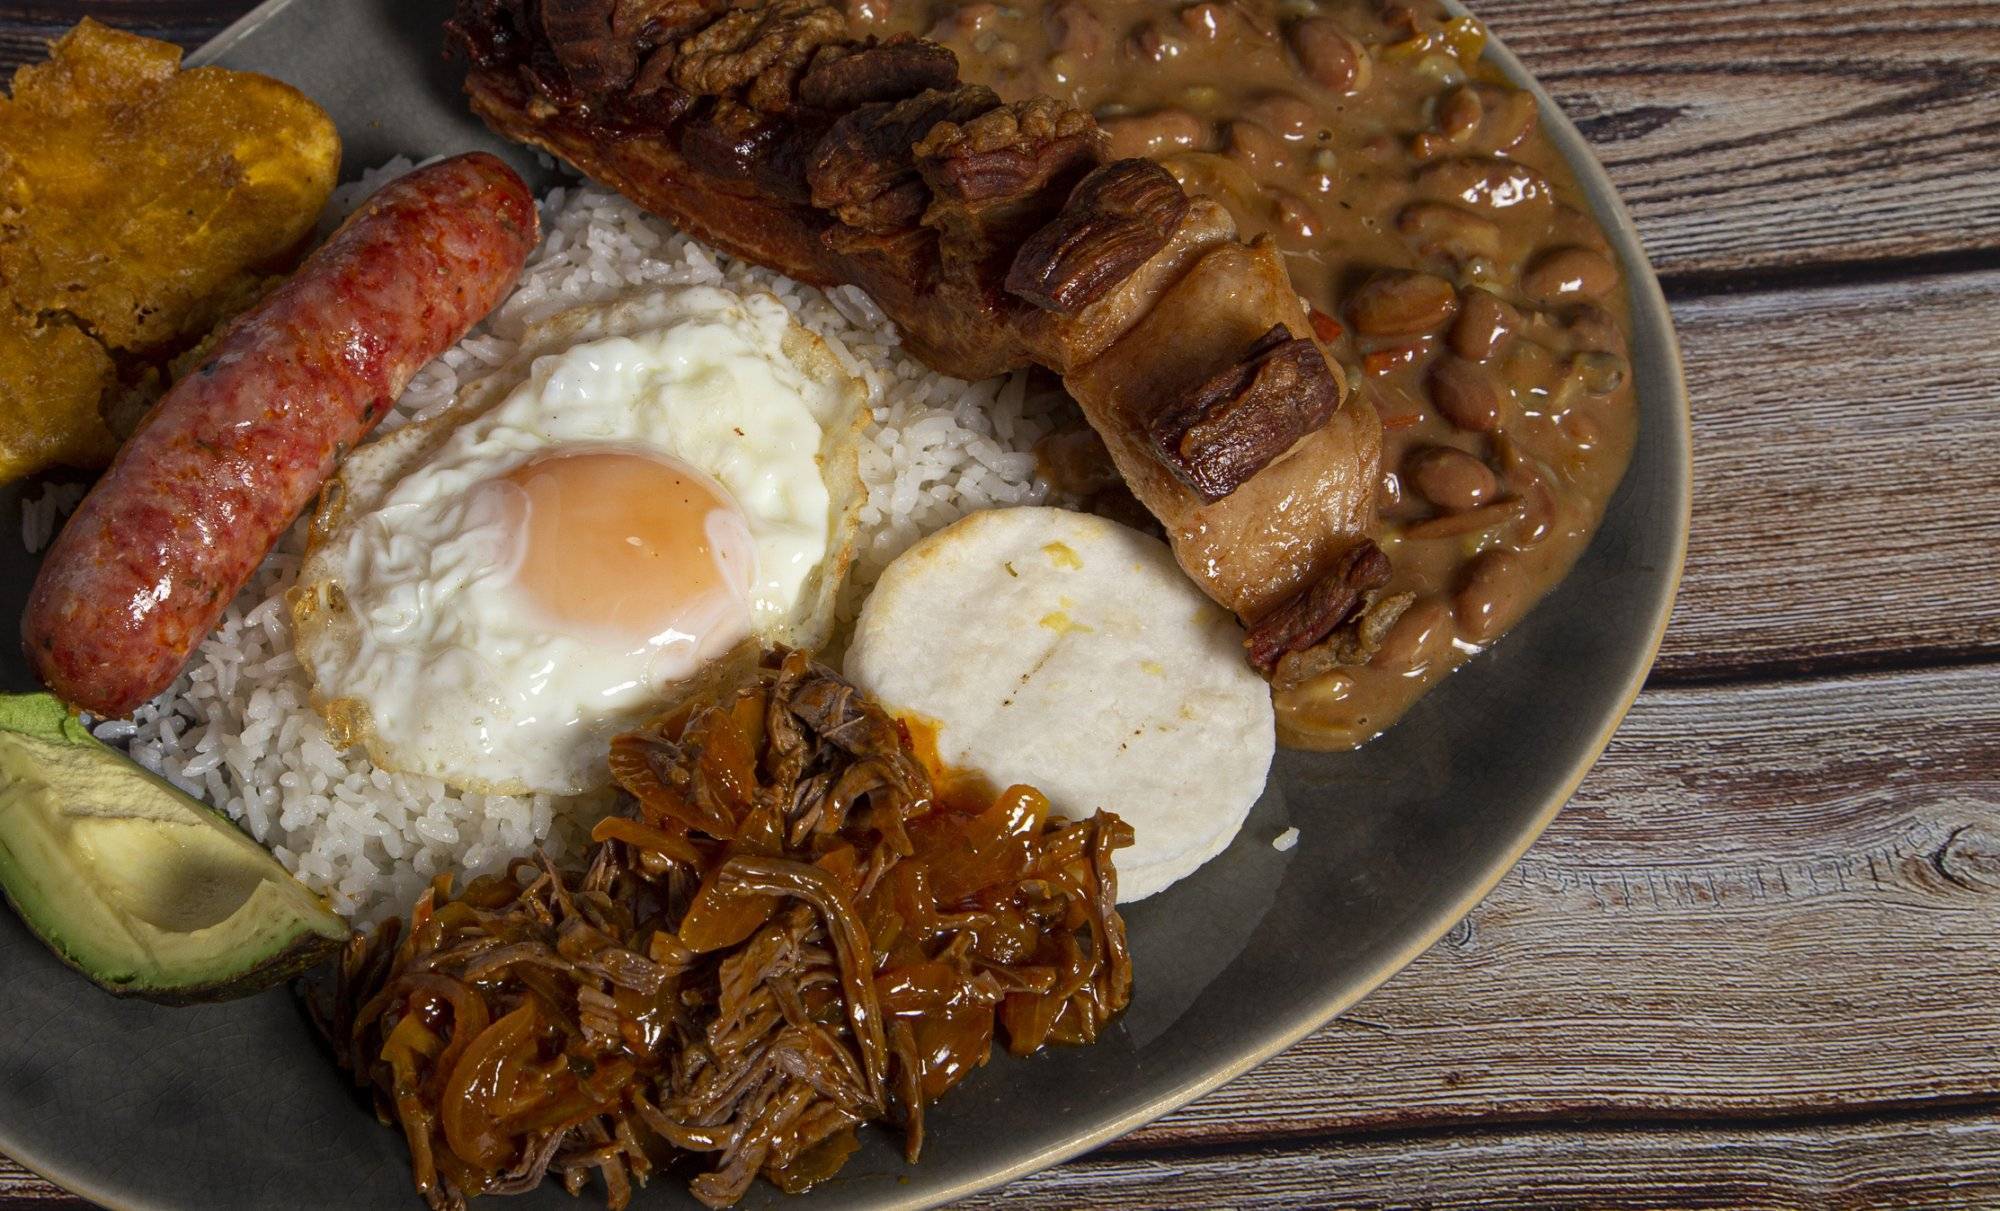 Bandeja paisa, typical dish of Colombia. It consists of chicharrón (fried pork belly), black pudding, sausage, arepa, beans, fried banana, avocado egg and rice